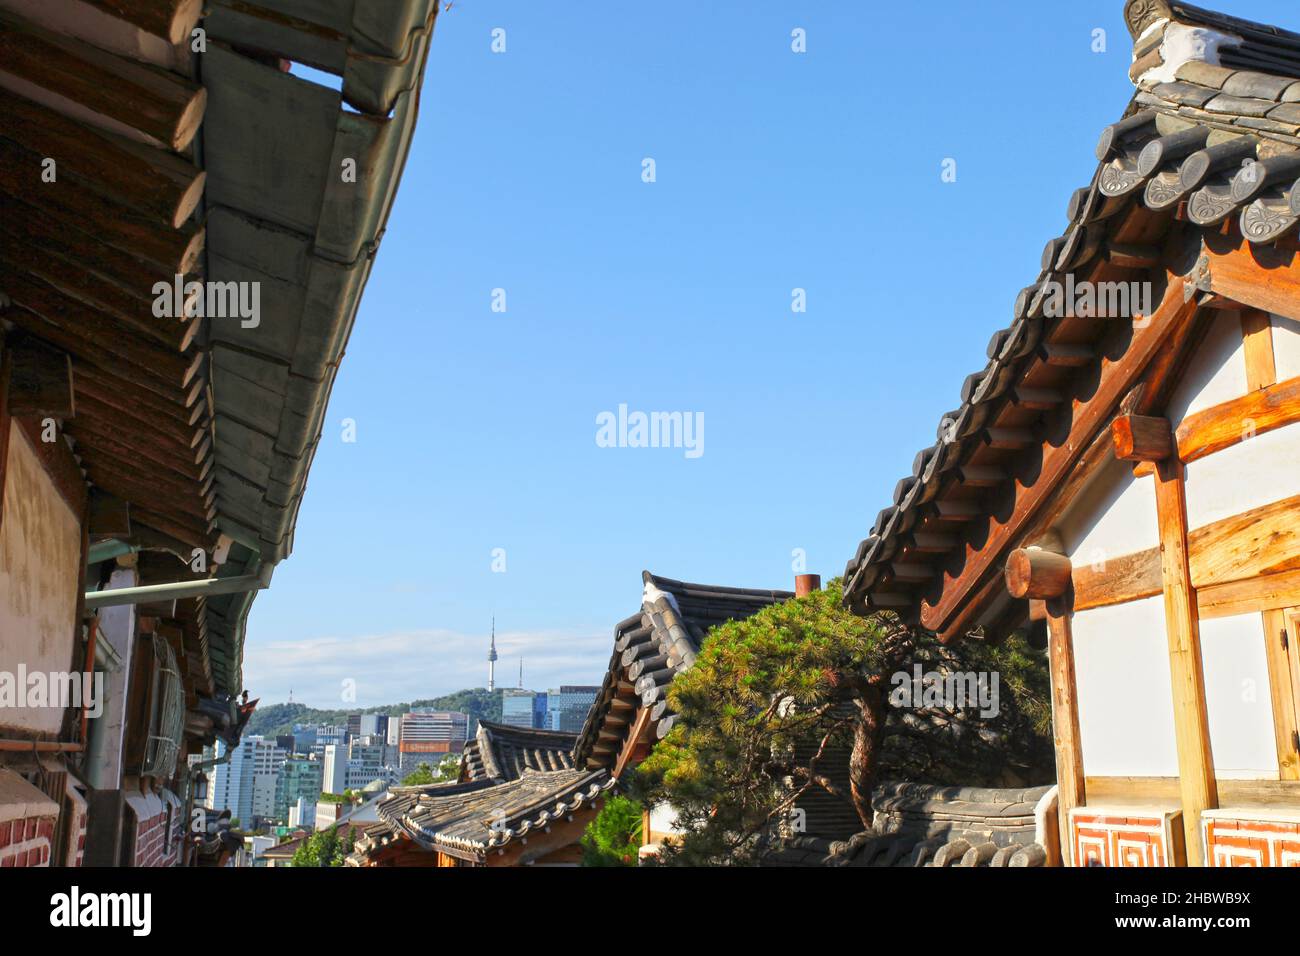 Bukchon Hanok Village in Seoul, South Korean, with traditionally built houses in the old Hanok style. Stock Photo